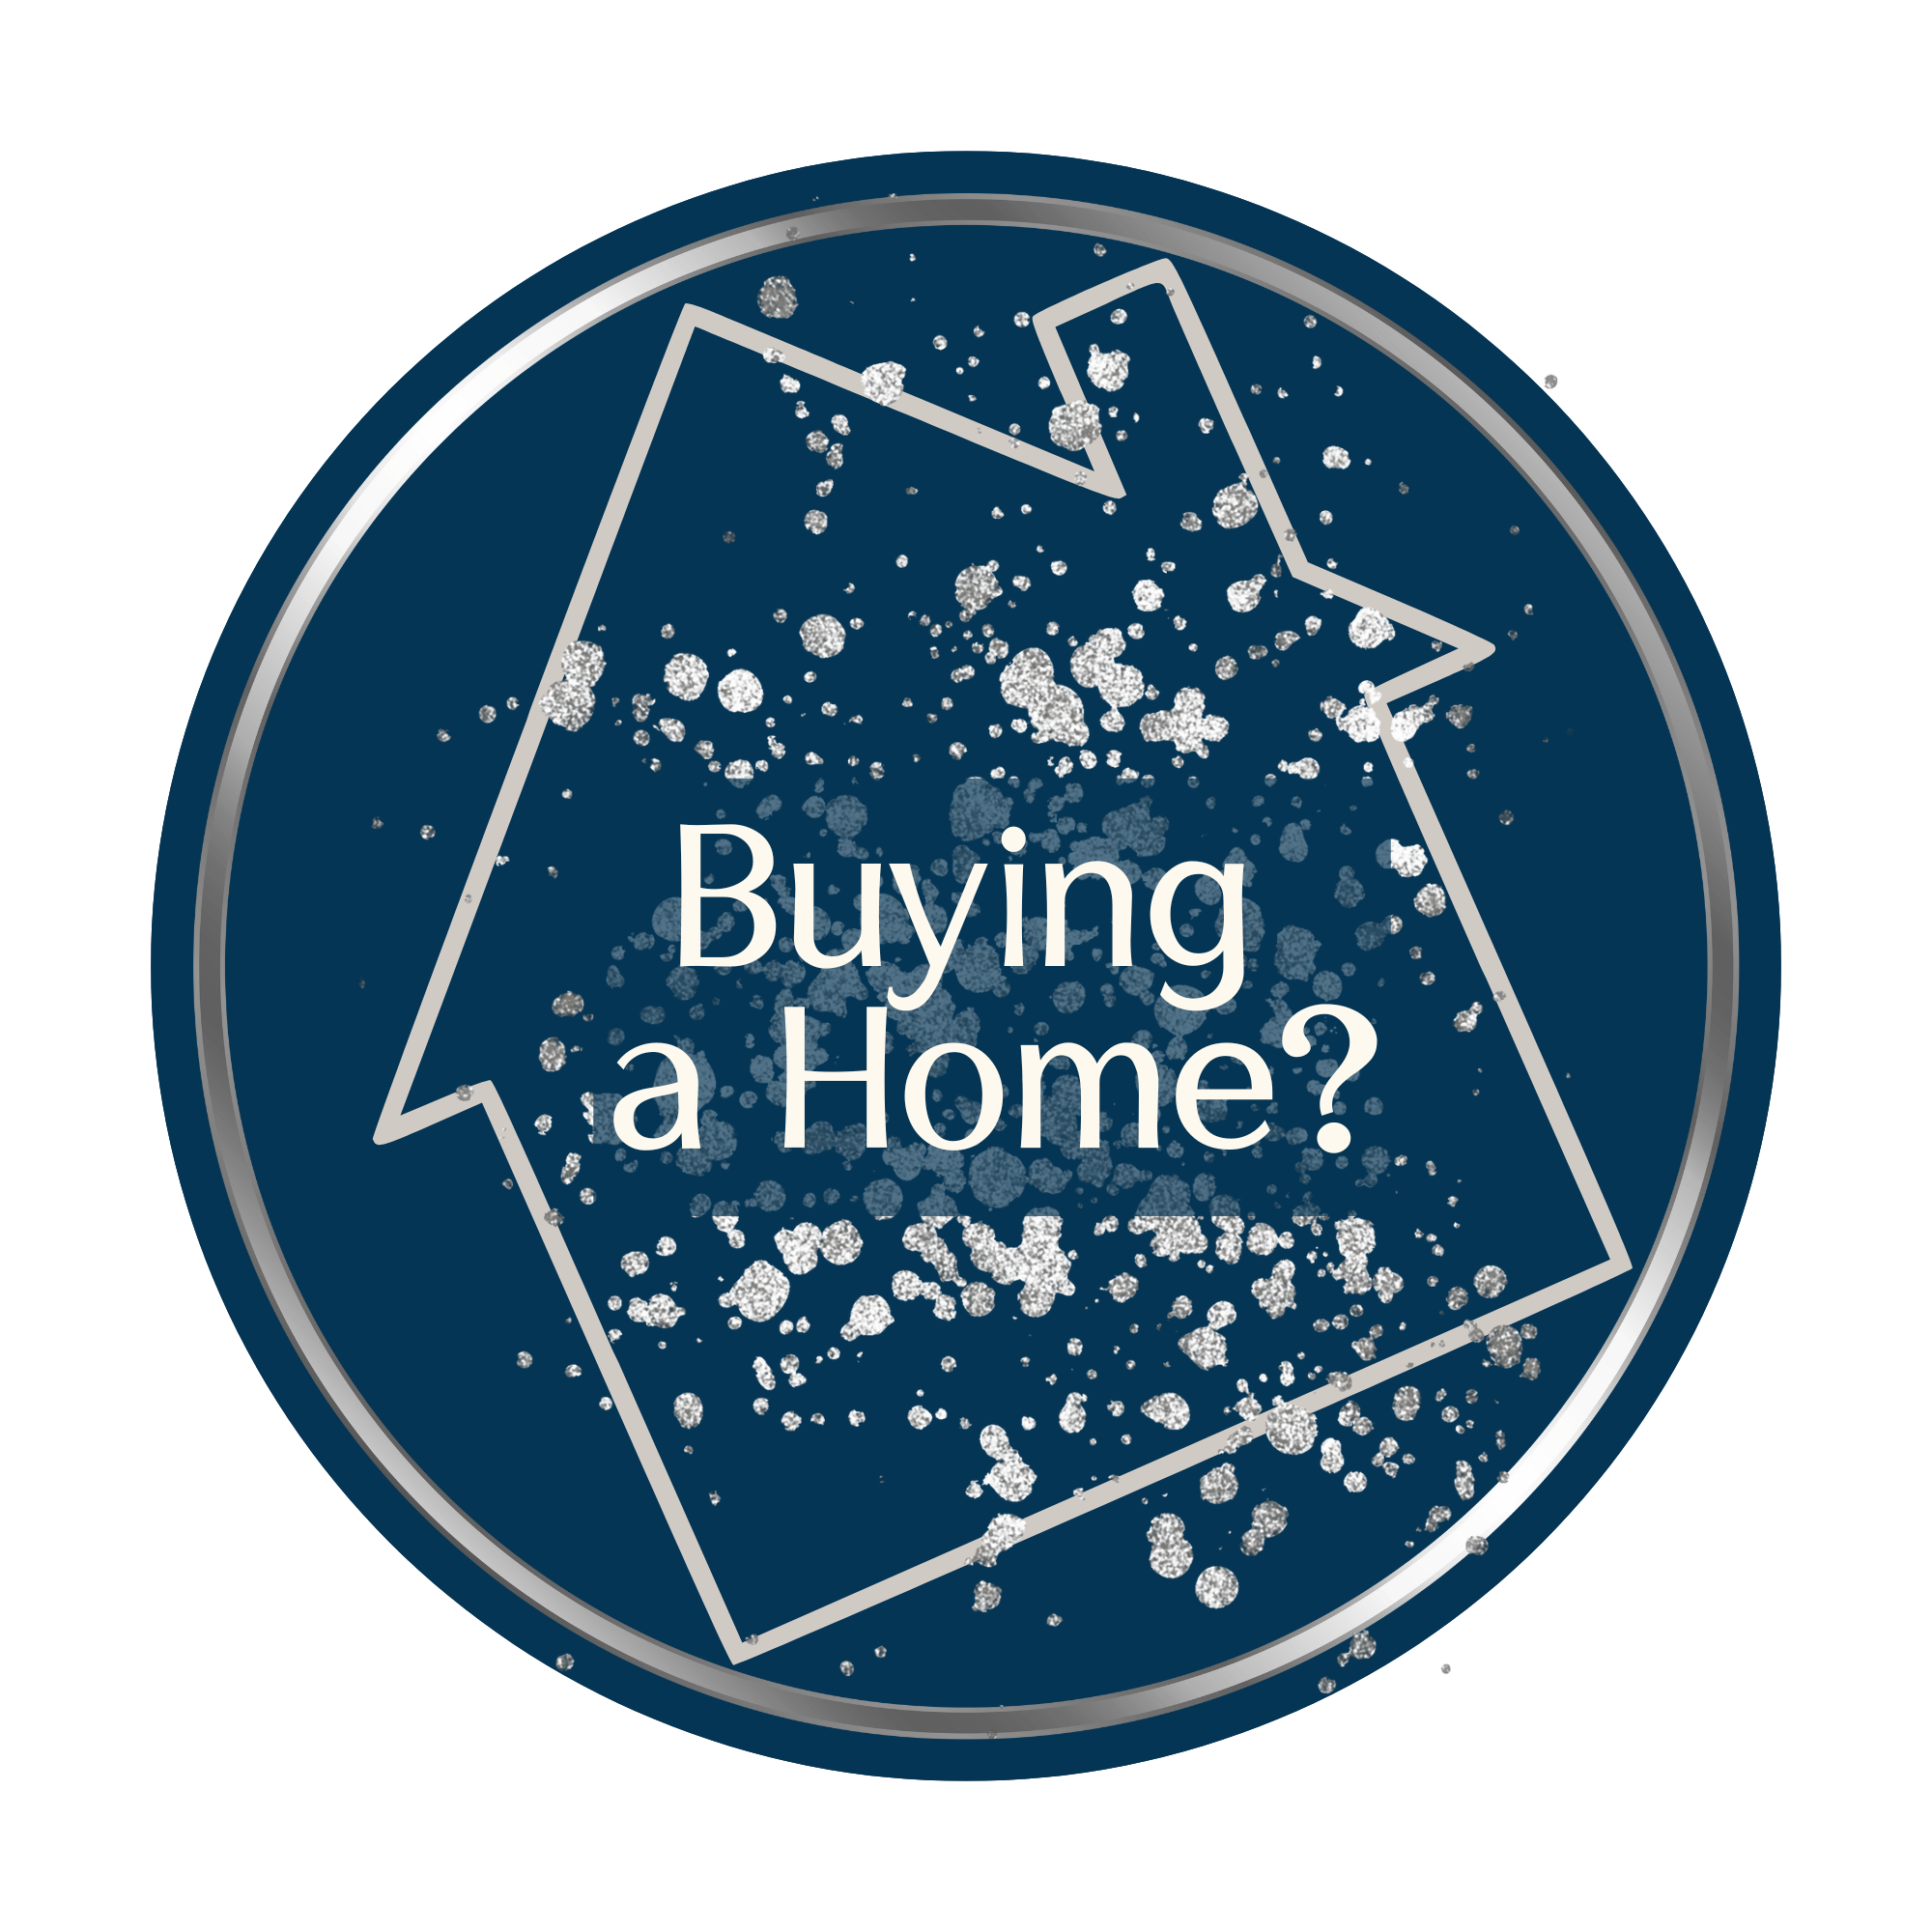 Buying a Home, Diane Florio, Real Estate, Curb Appeal, Research Triangle, Wake Forest, Raleigh, Durham, Coastal NC, North Carolina, Tips and Tricks, Home Décor, Listing a Home, Selling a Home, Buying a Home, Buyers Agent, Sellers Agent, Licensed Real Estate Agent